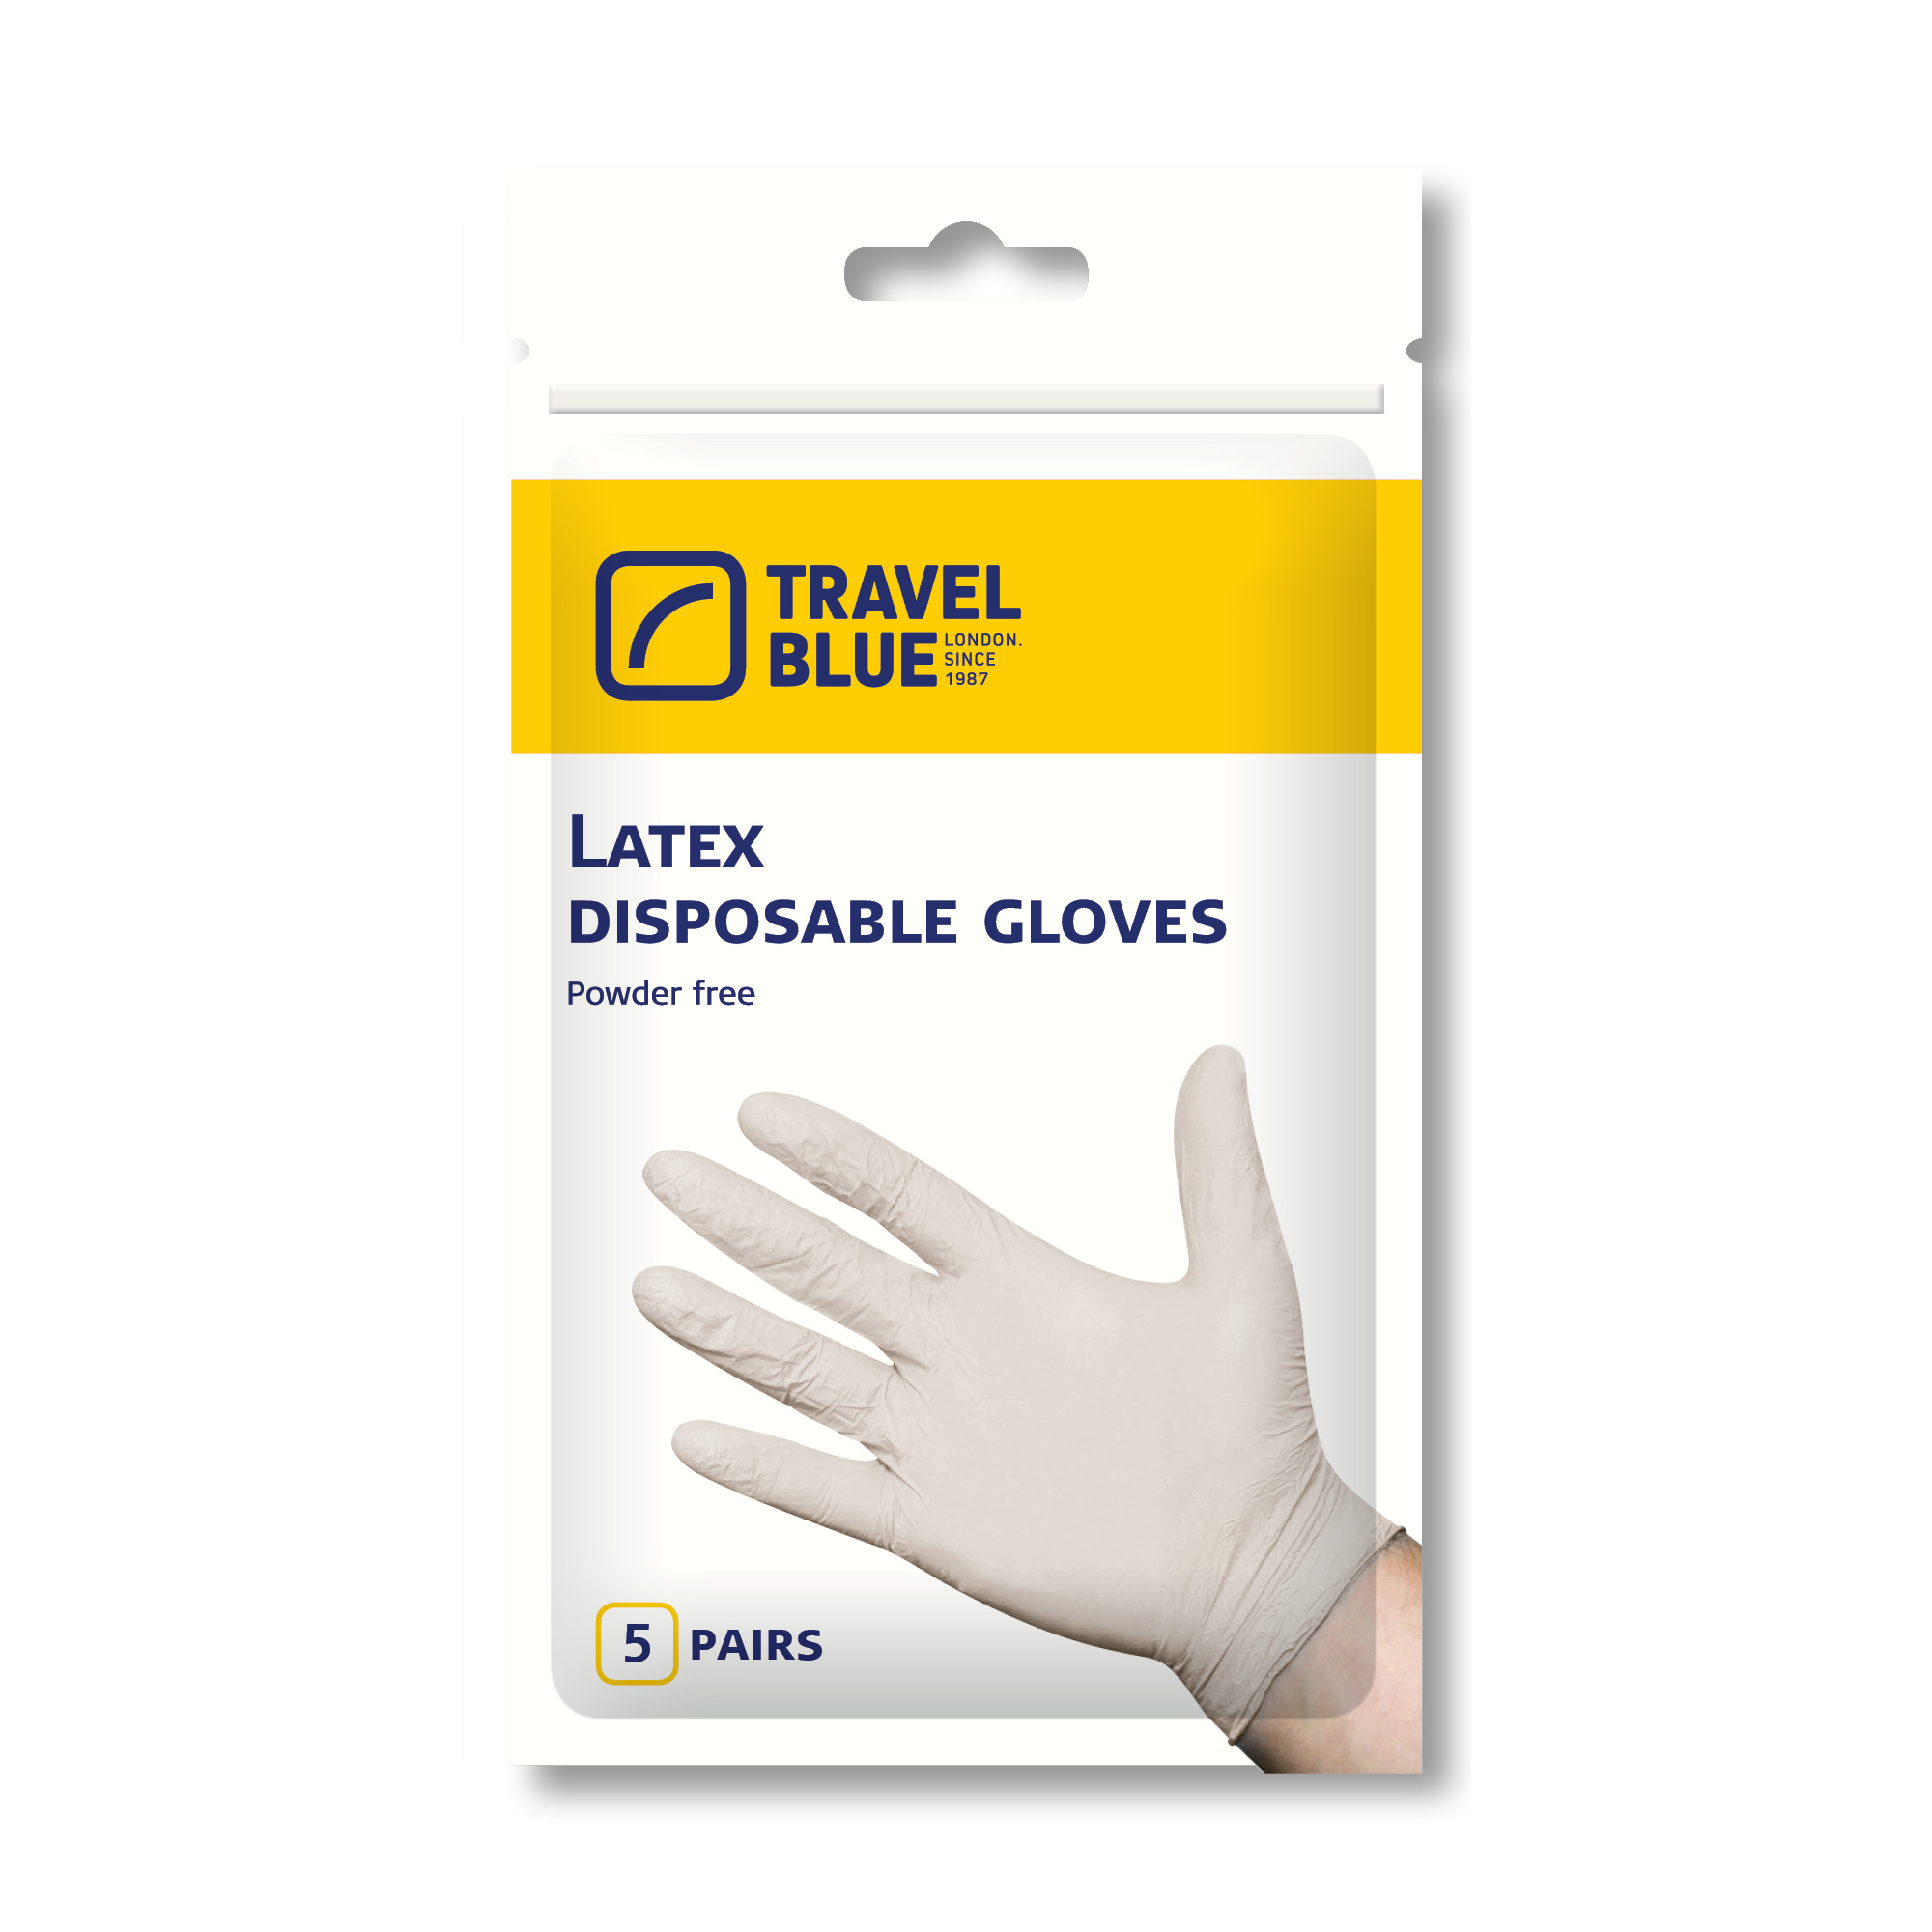 Latex Disposable Gloves | Travel Blue Travel Accessories